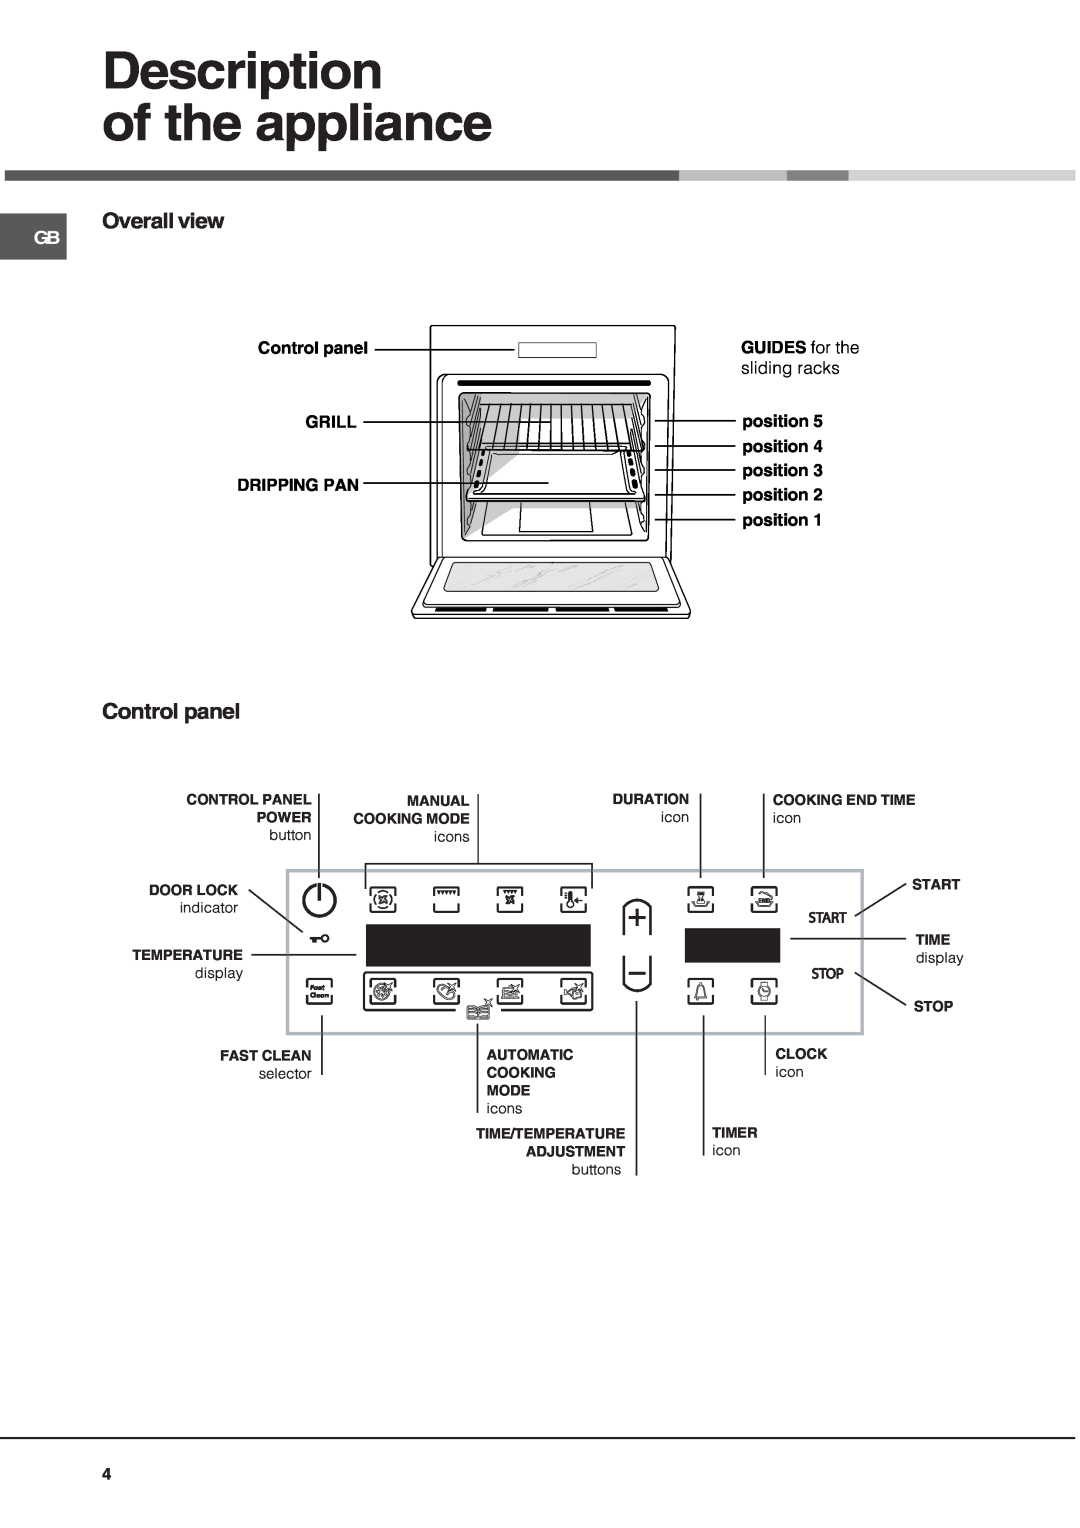 Hotpoint SQ103PGI Description of the appliance, Control panel GRILL DRIPPING PAN, GUIDES for the sliding racks, button 